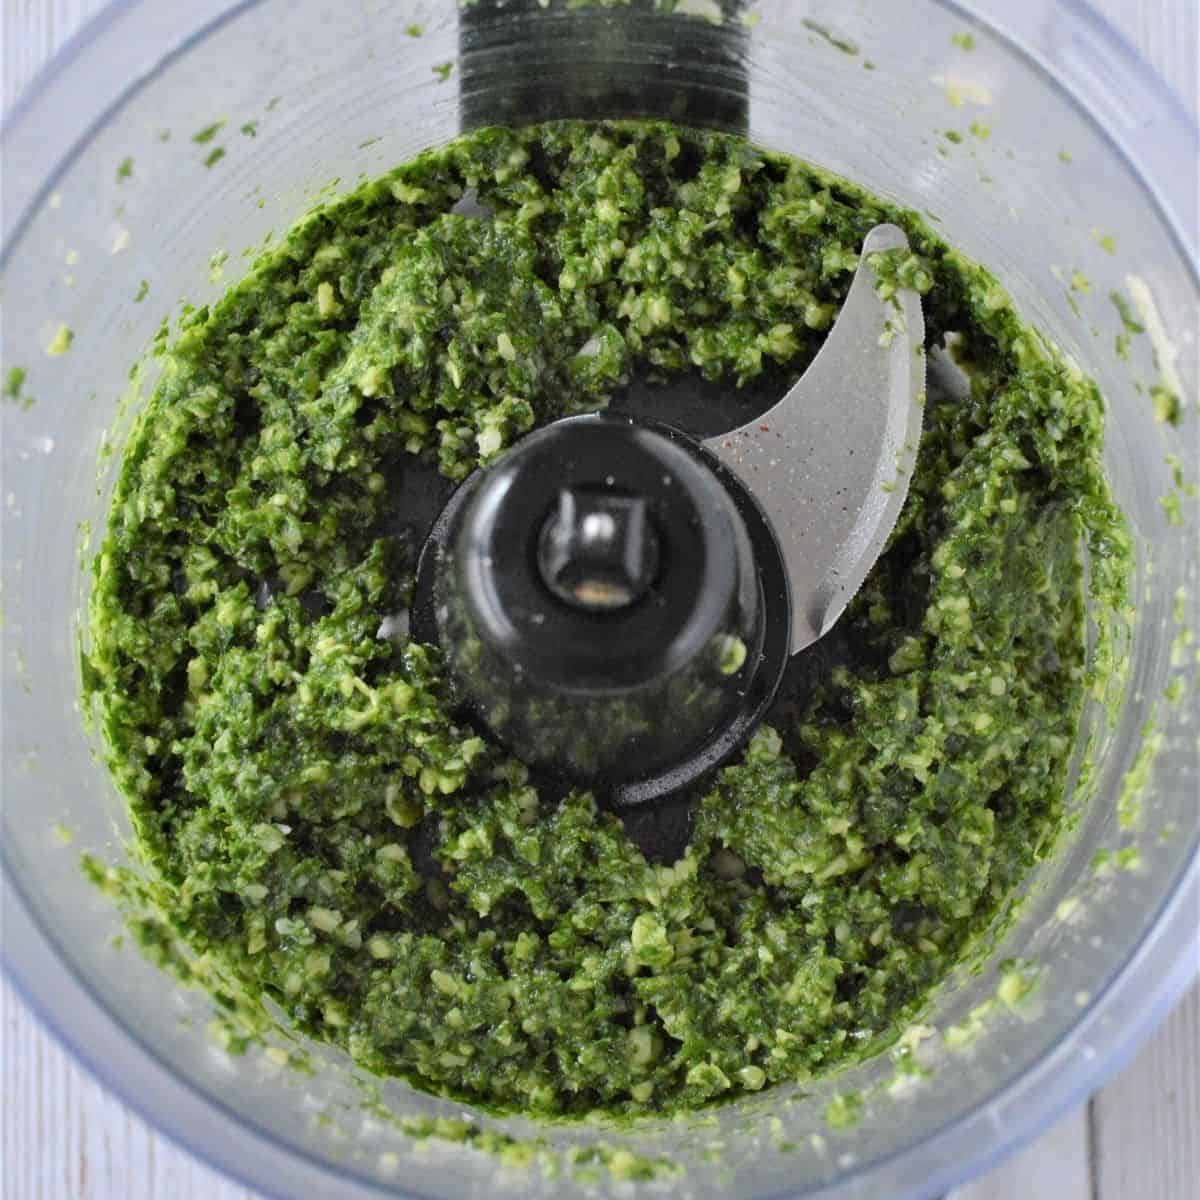 The ingredients for kale pesto in a food processor after they have been blended together.